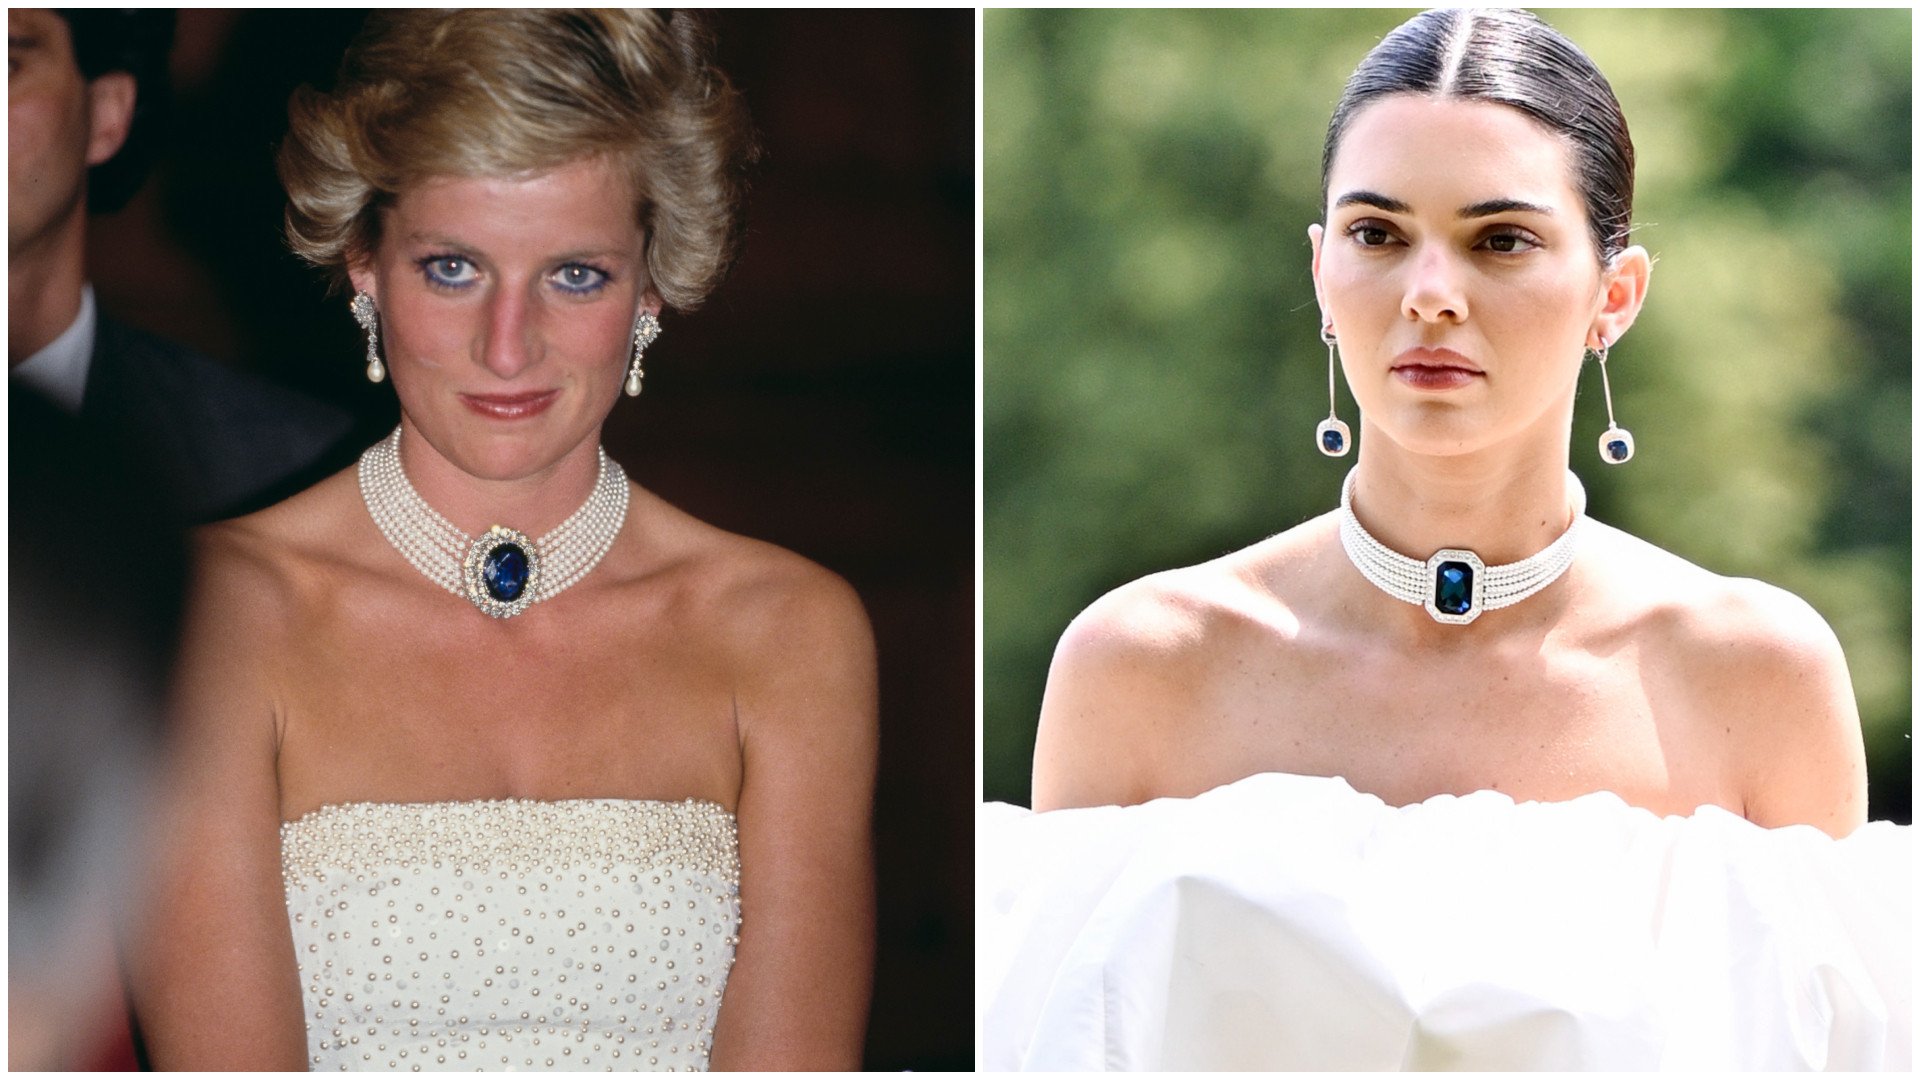 Evolution of Choker Necklace: History to Modern Elegance - Only Natural  Diamonds